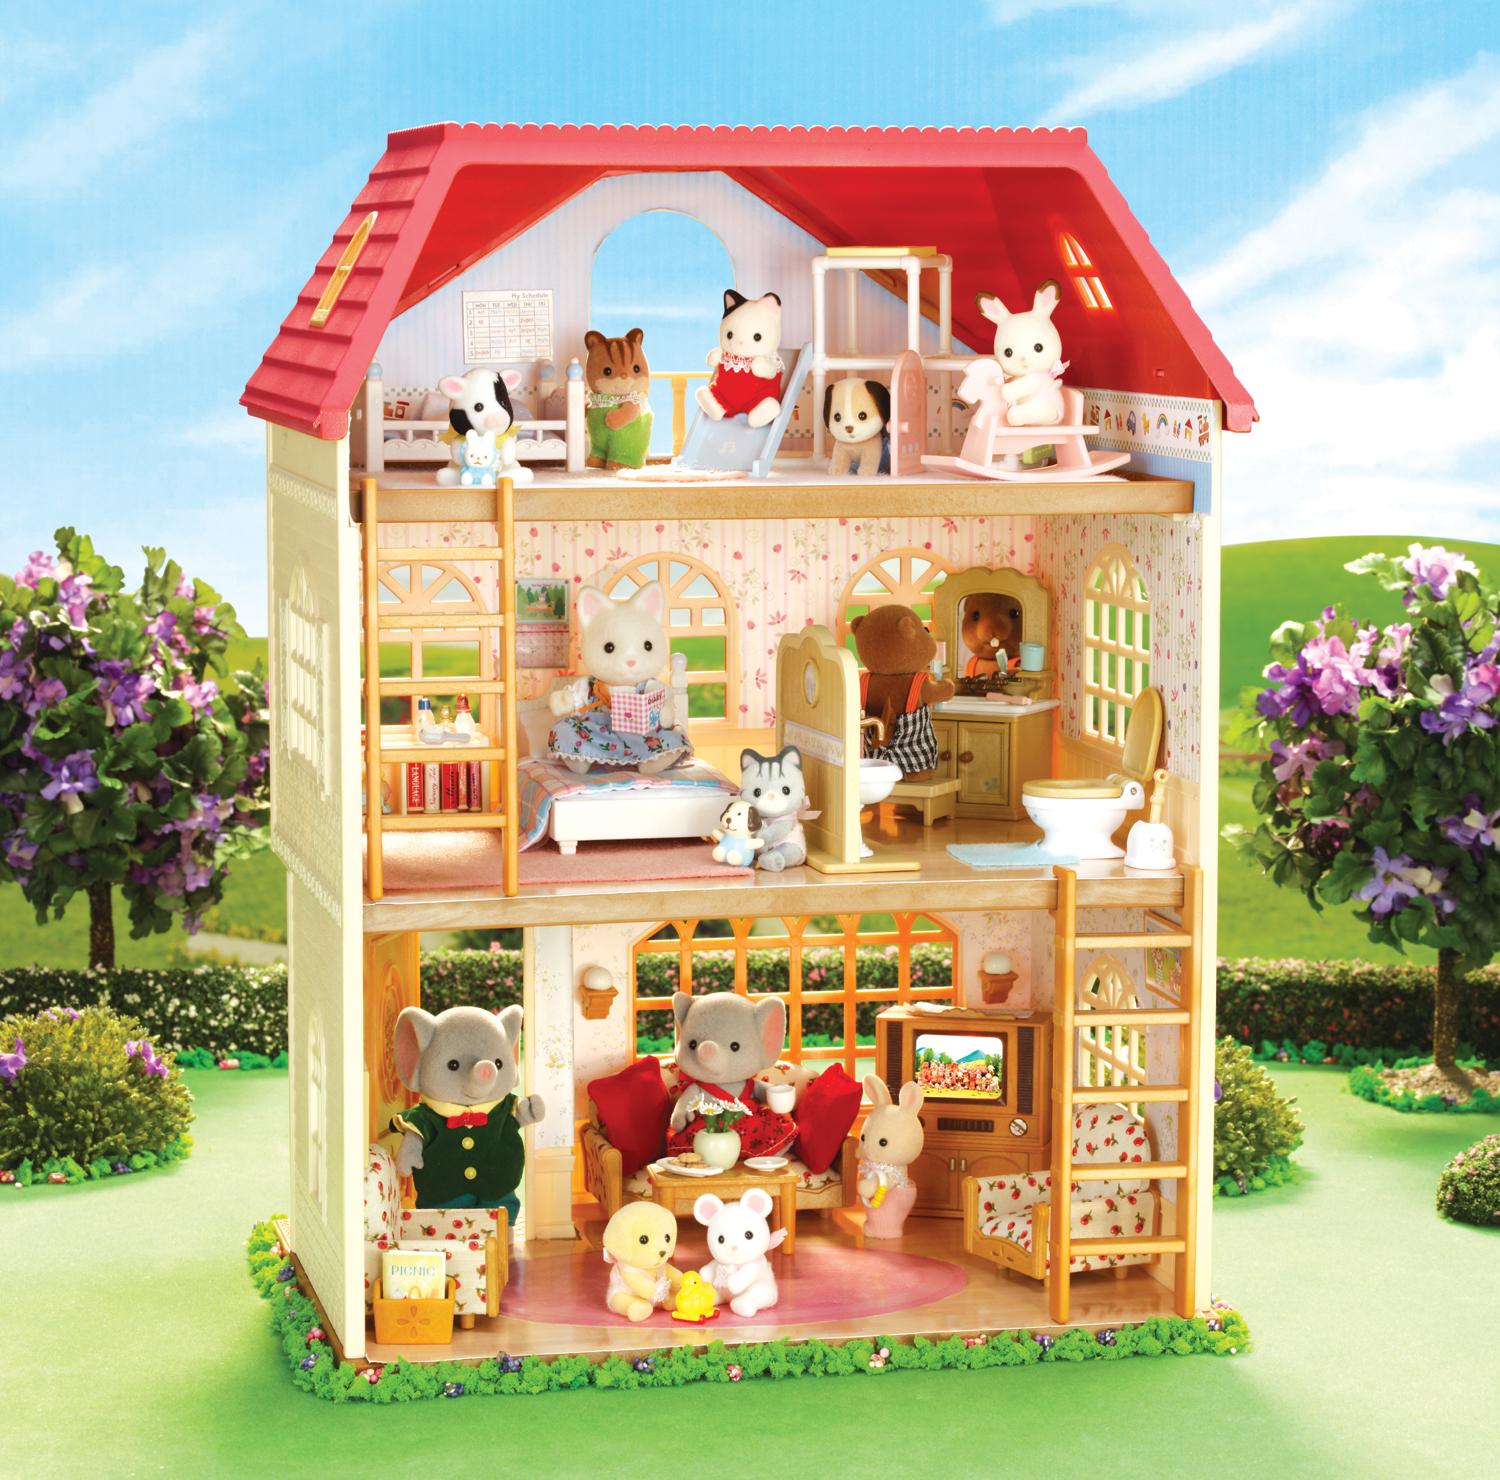 Calico Critters Oakwood Home Search Pictures Photos